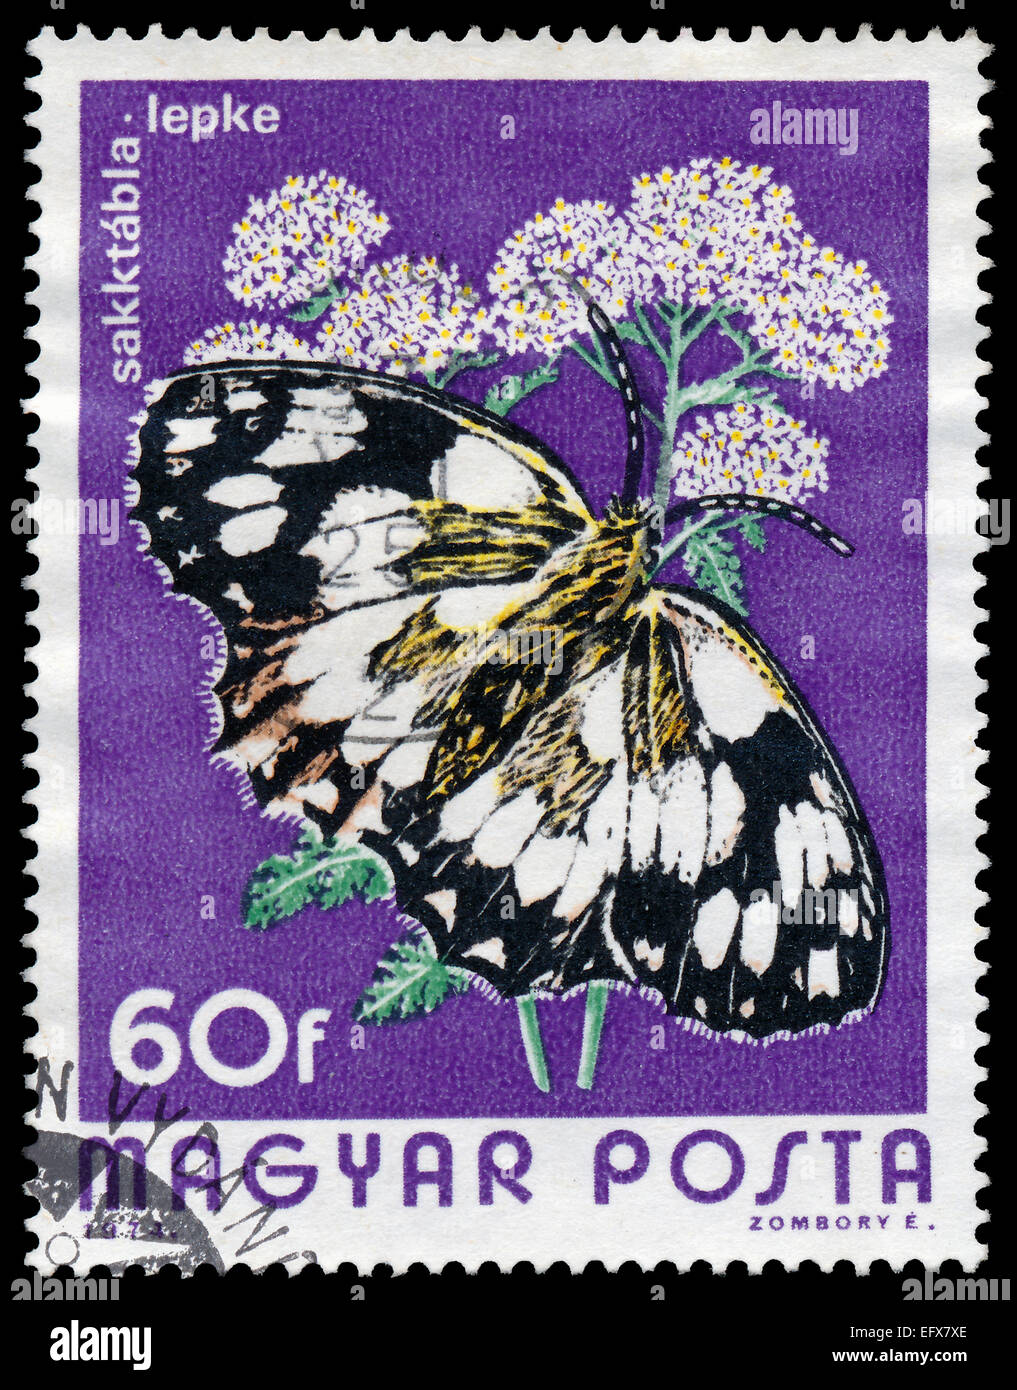 HUNGARY - CIRCA 1974: A Stamp printed in Hungary shows butterfly Marbled White - Melanargia galathea, circa 1974 Stock Photo